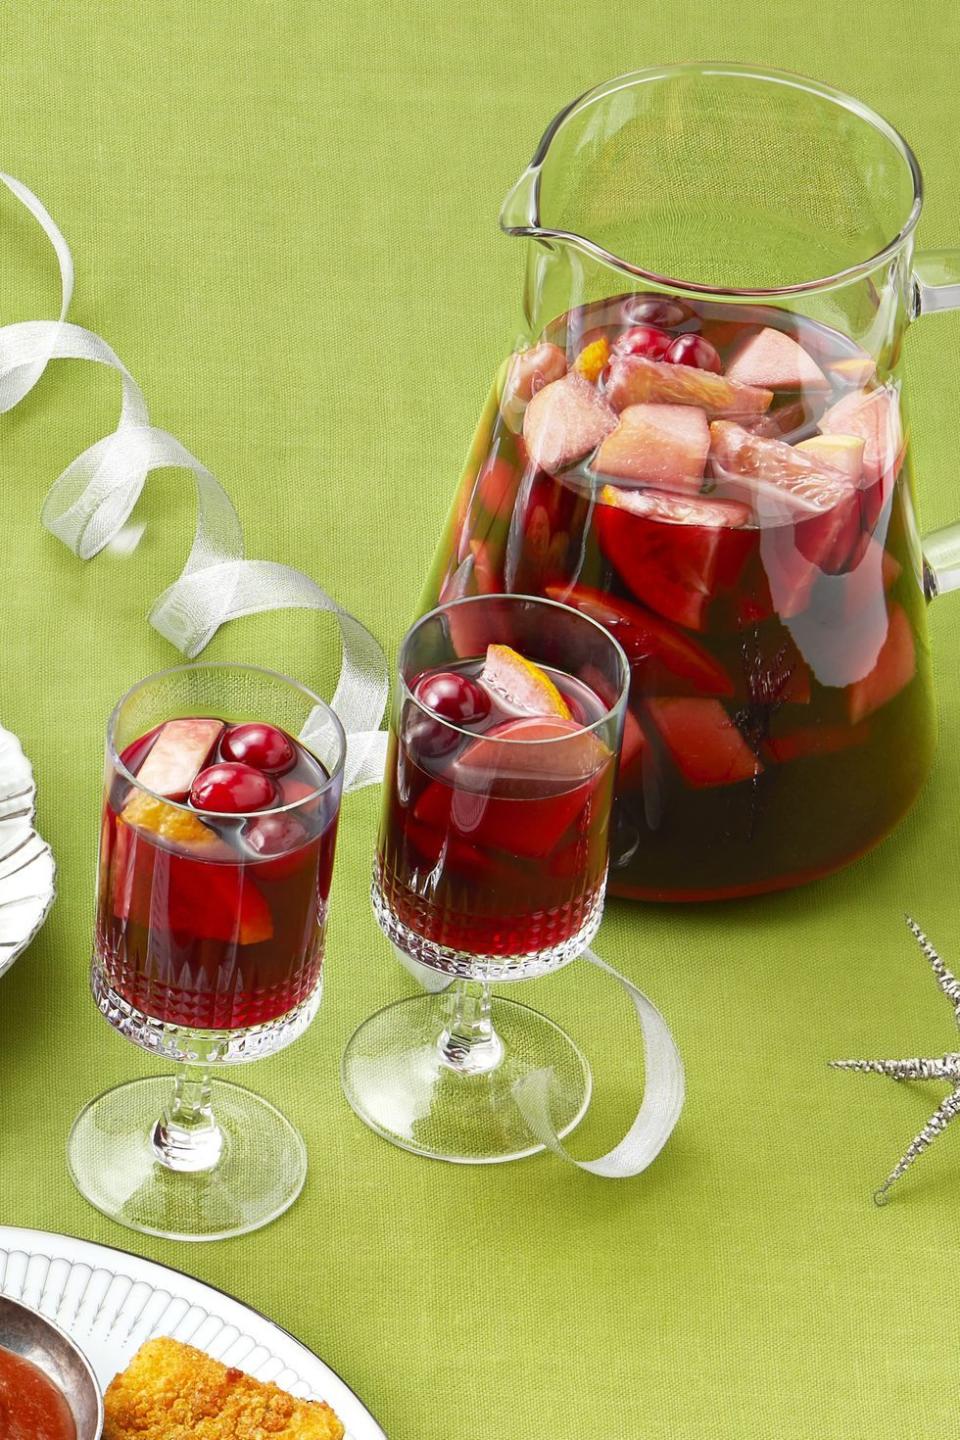 These Festive Christmas Cocktails Will Make Everyone Merry